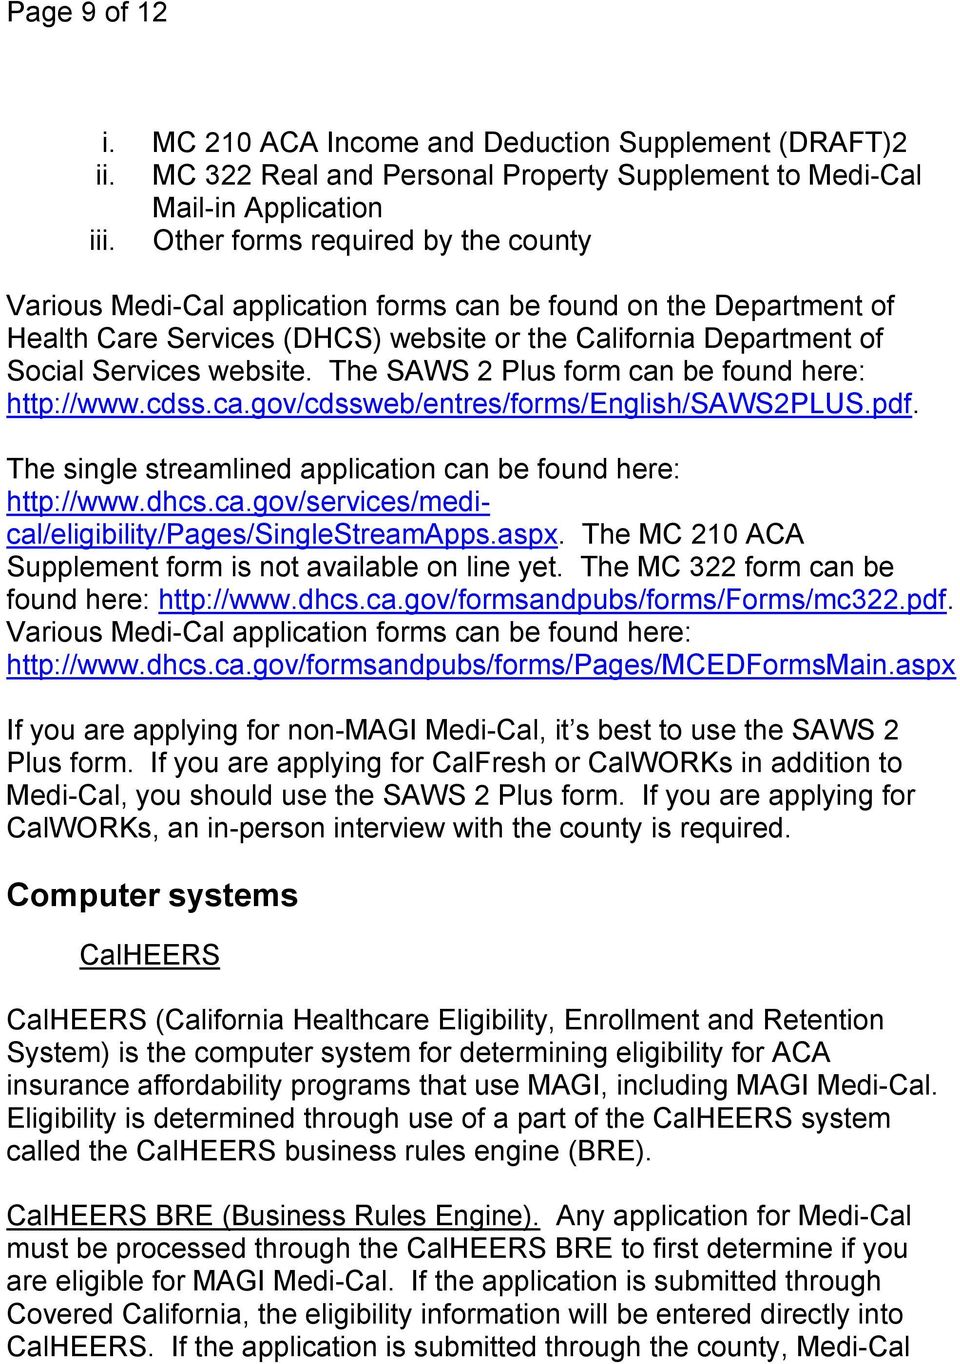 Applying For Medi Cal Other Insurance Affordability Programs Pdf Free Download